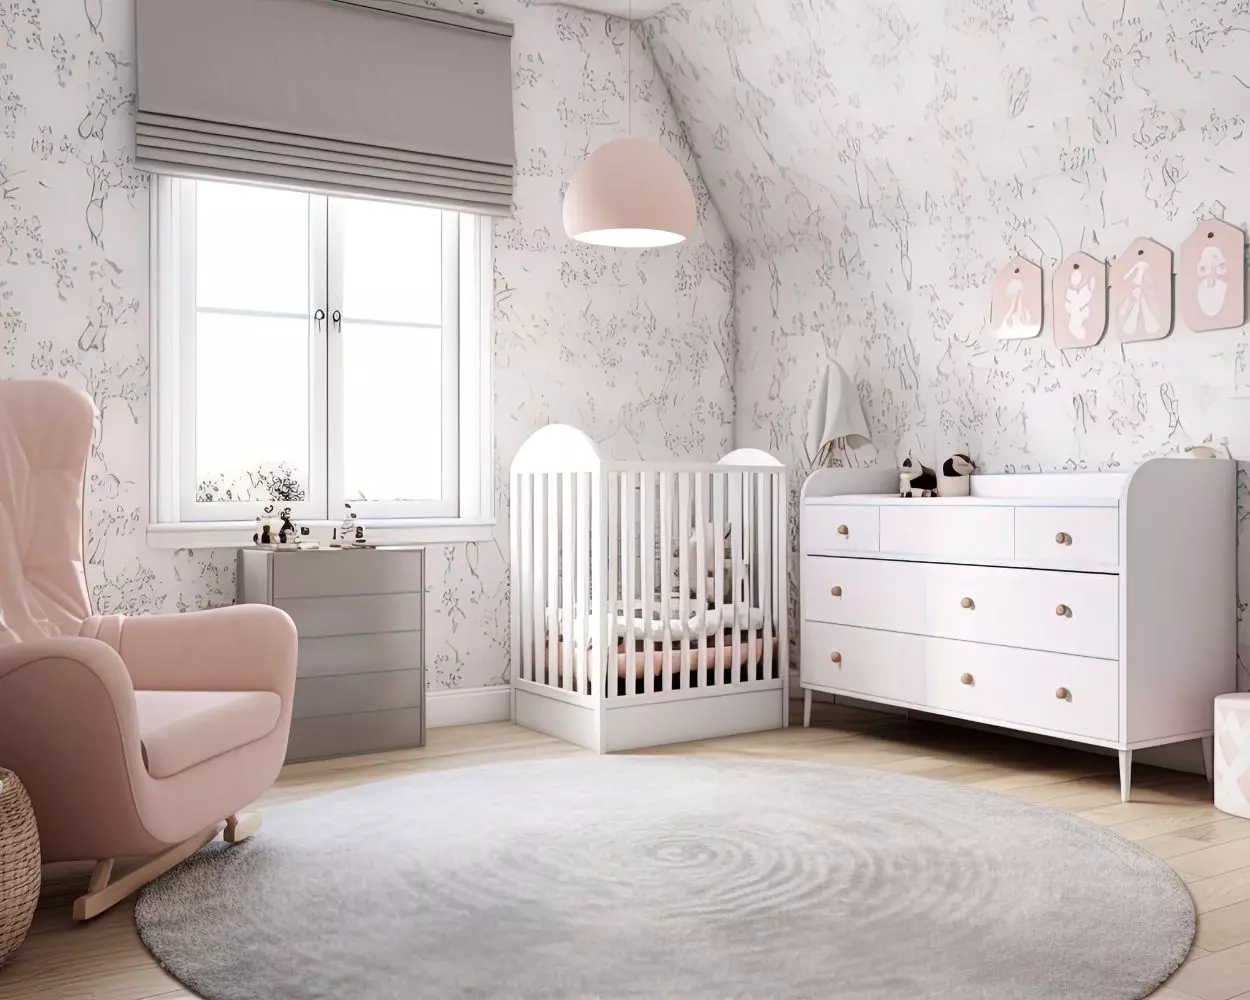 Designing a baby room with a sloping ceiling